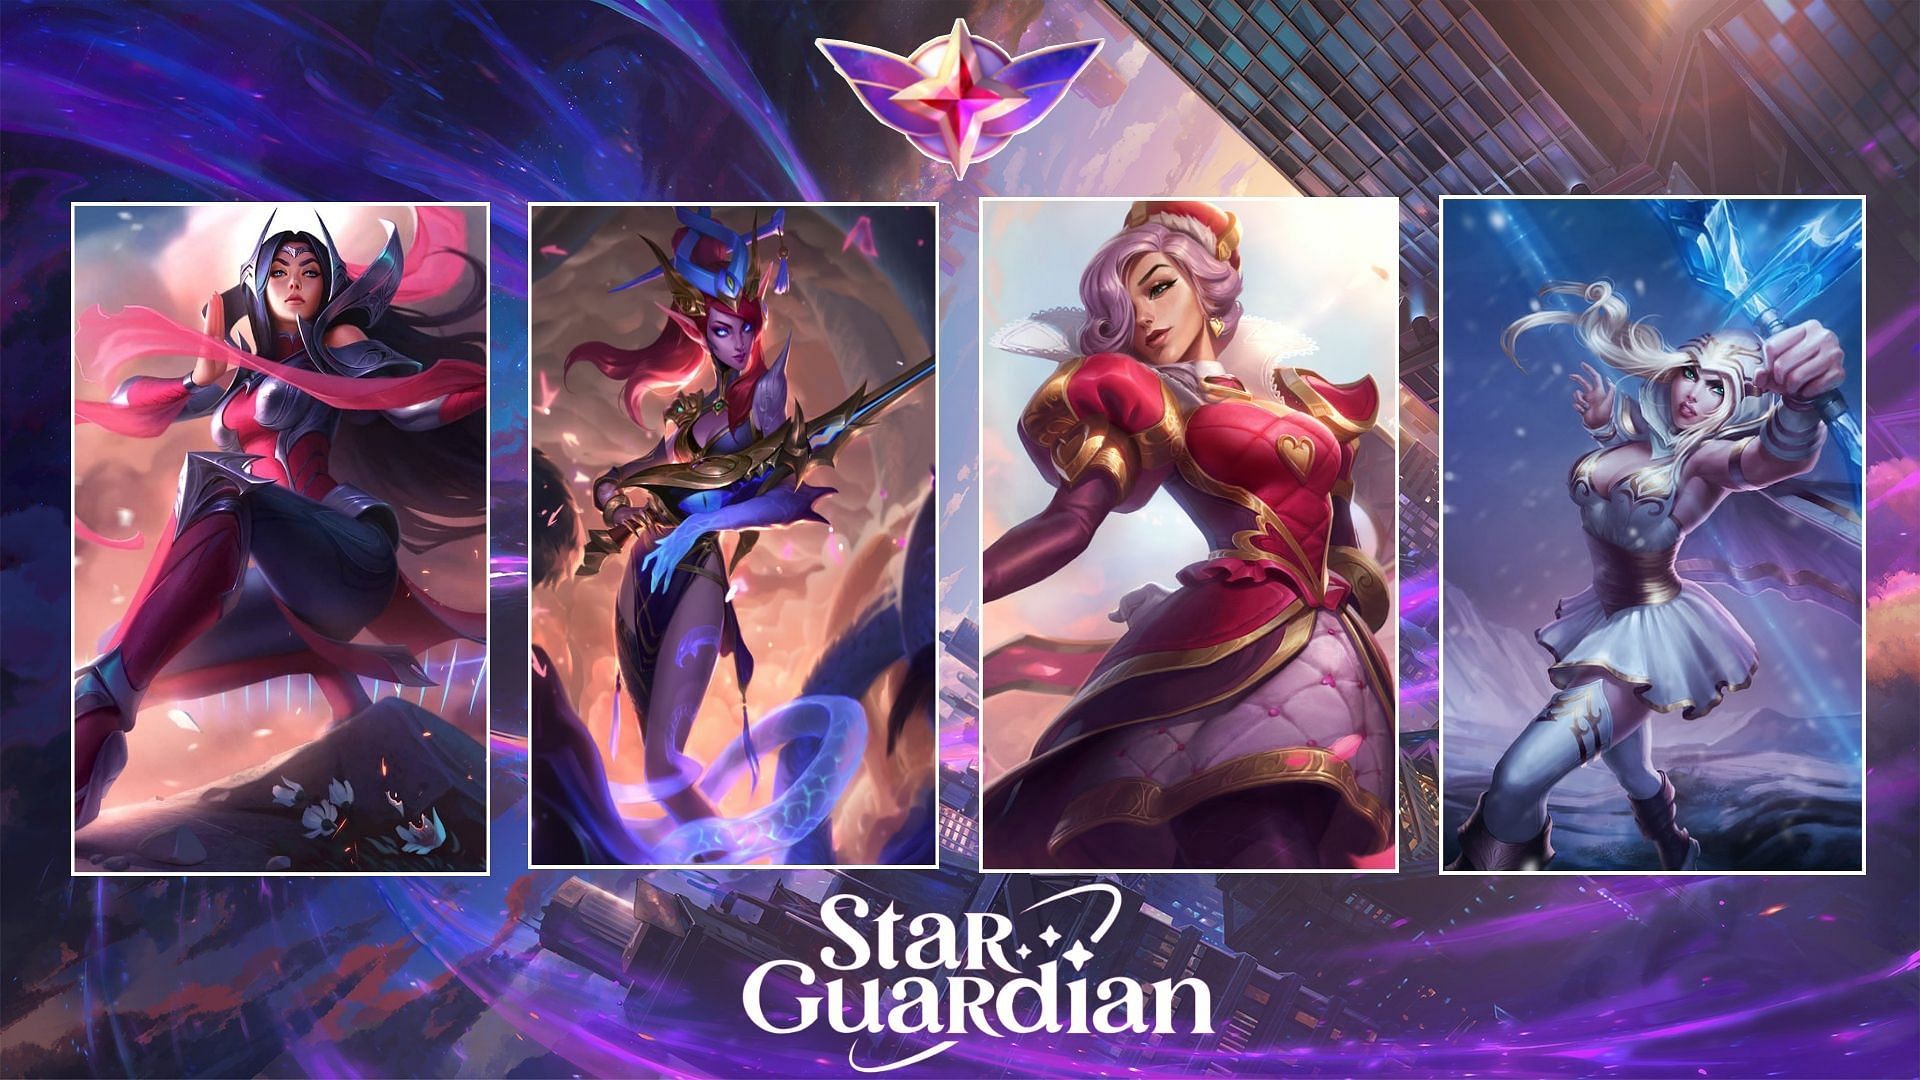 Fans want more champions in the Star Guardian roster (Images via Riot Games)